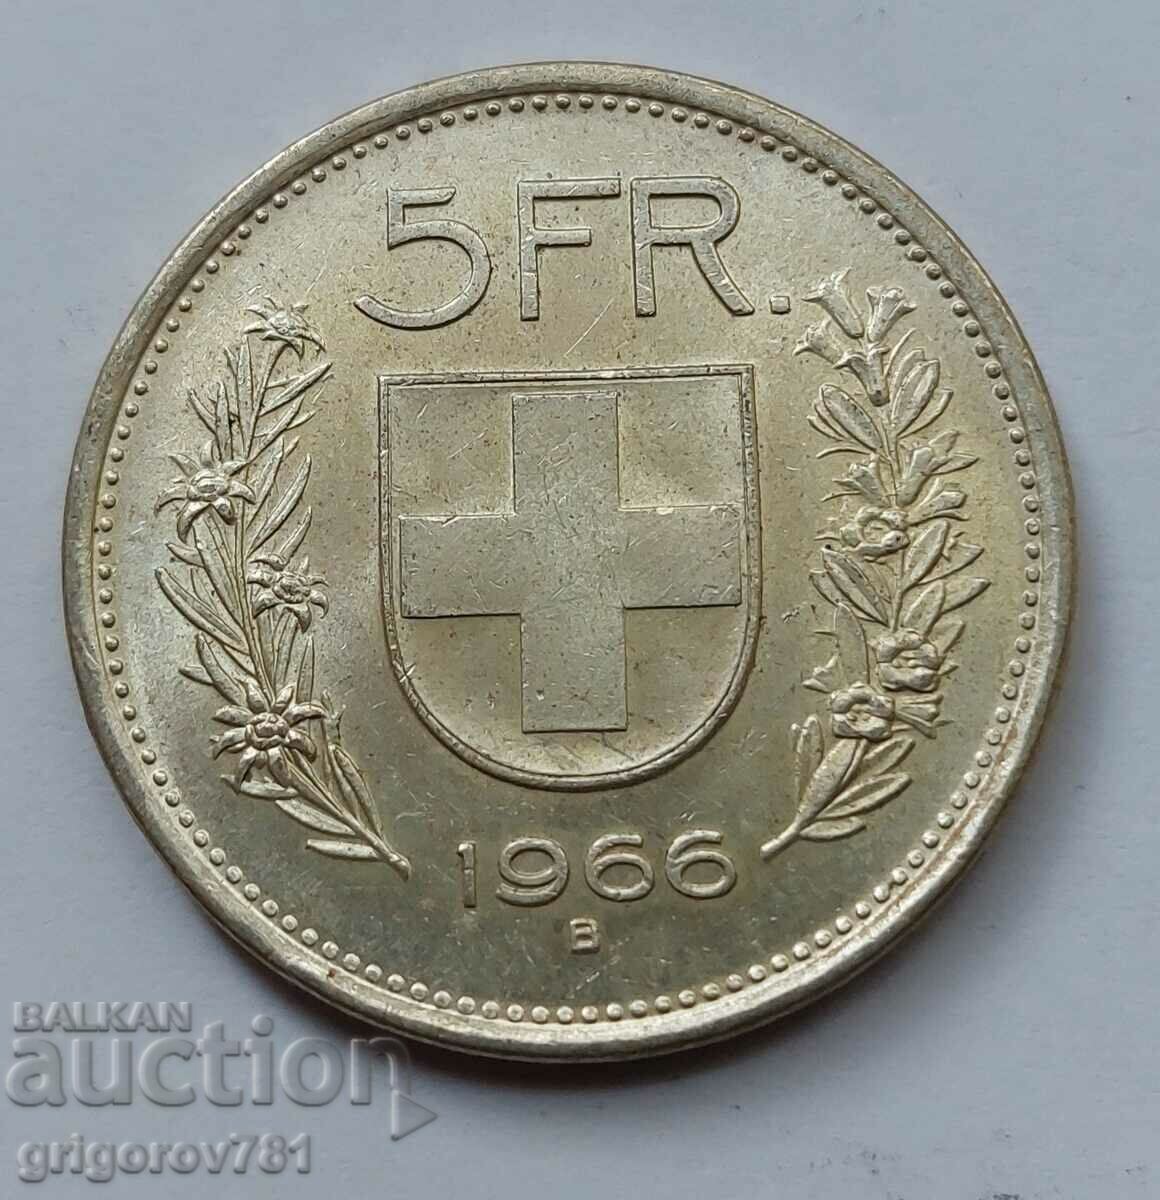 5 Francs Silver Switzerland 1966 B - Silver Coin #9